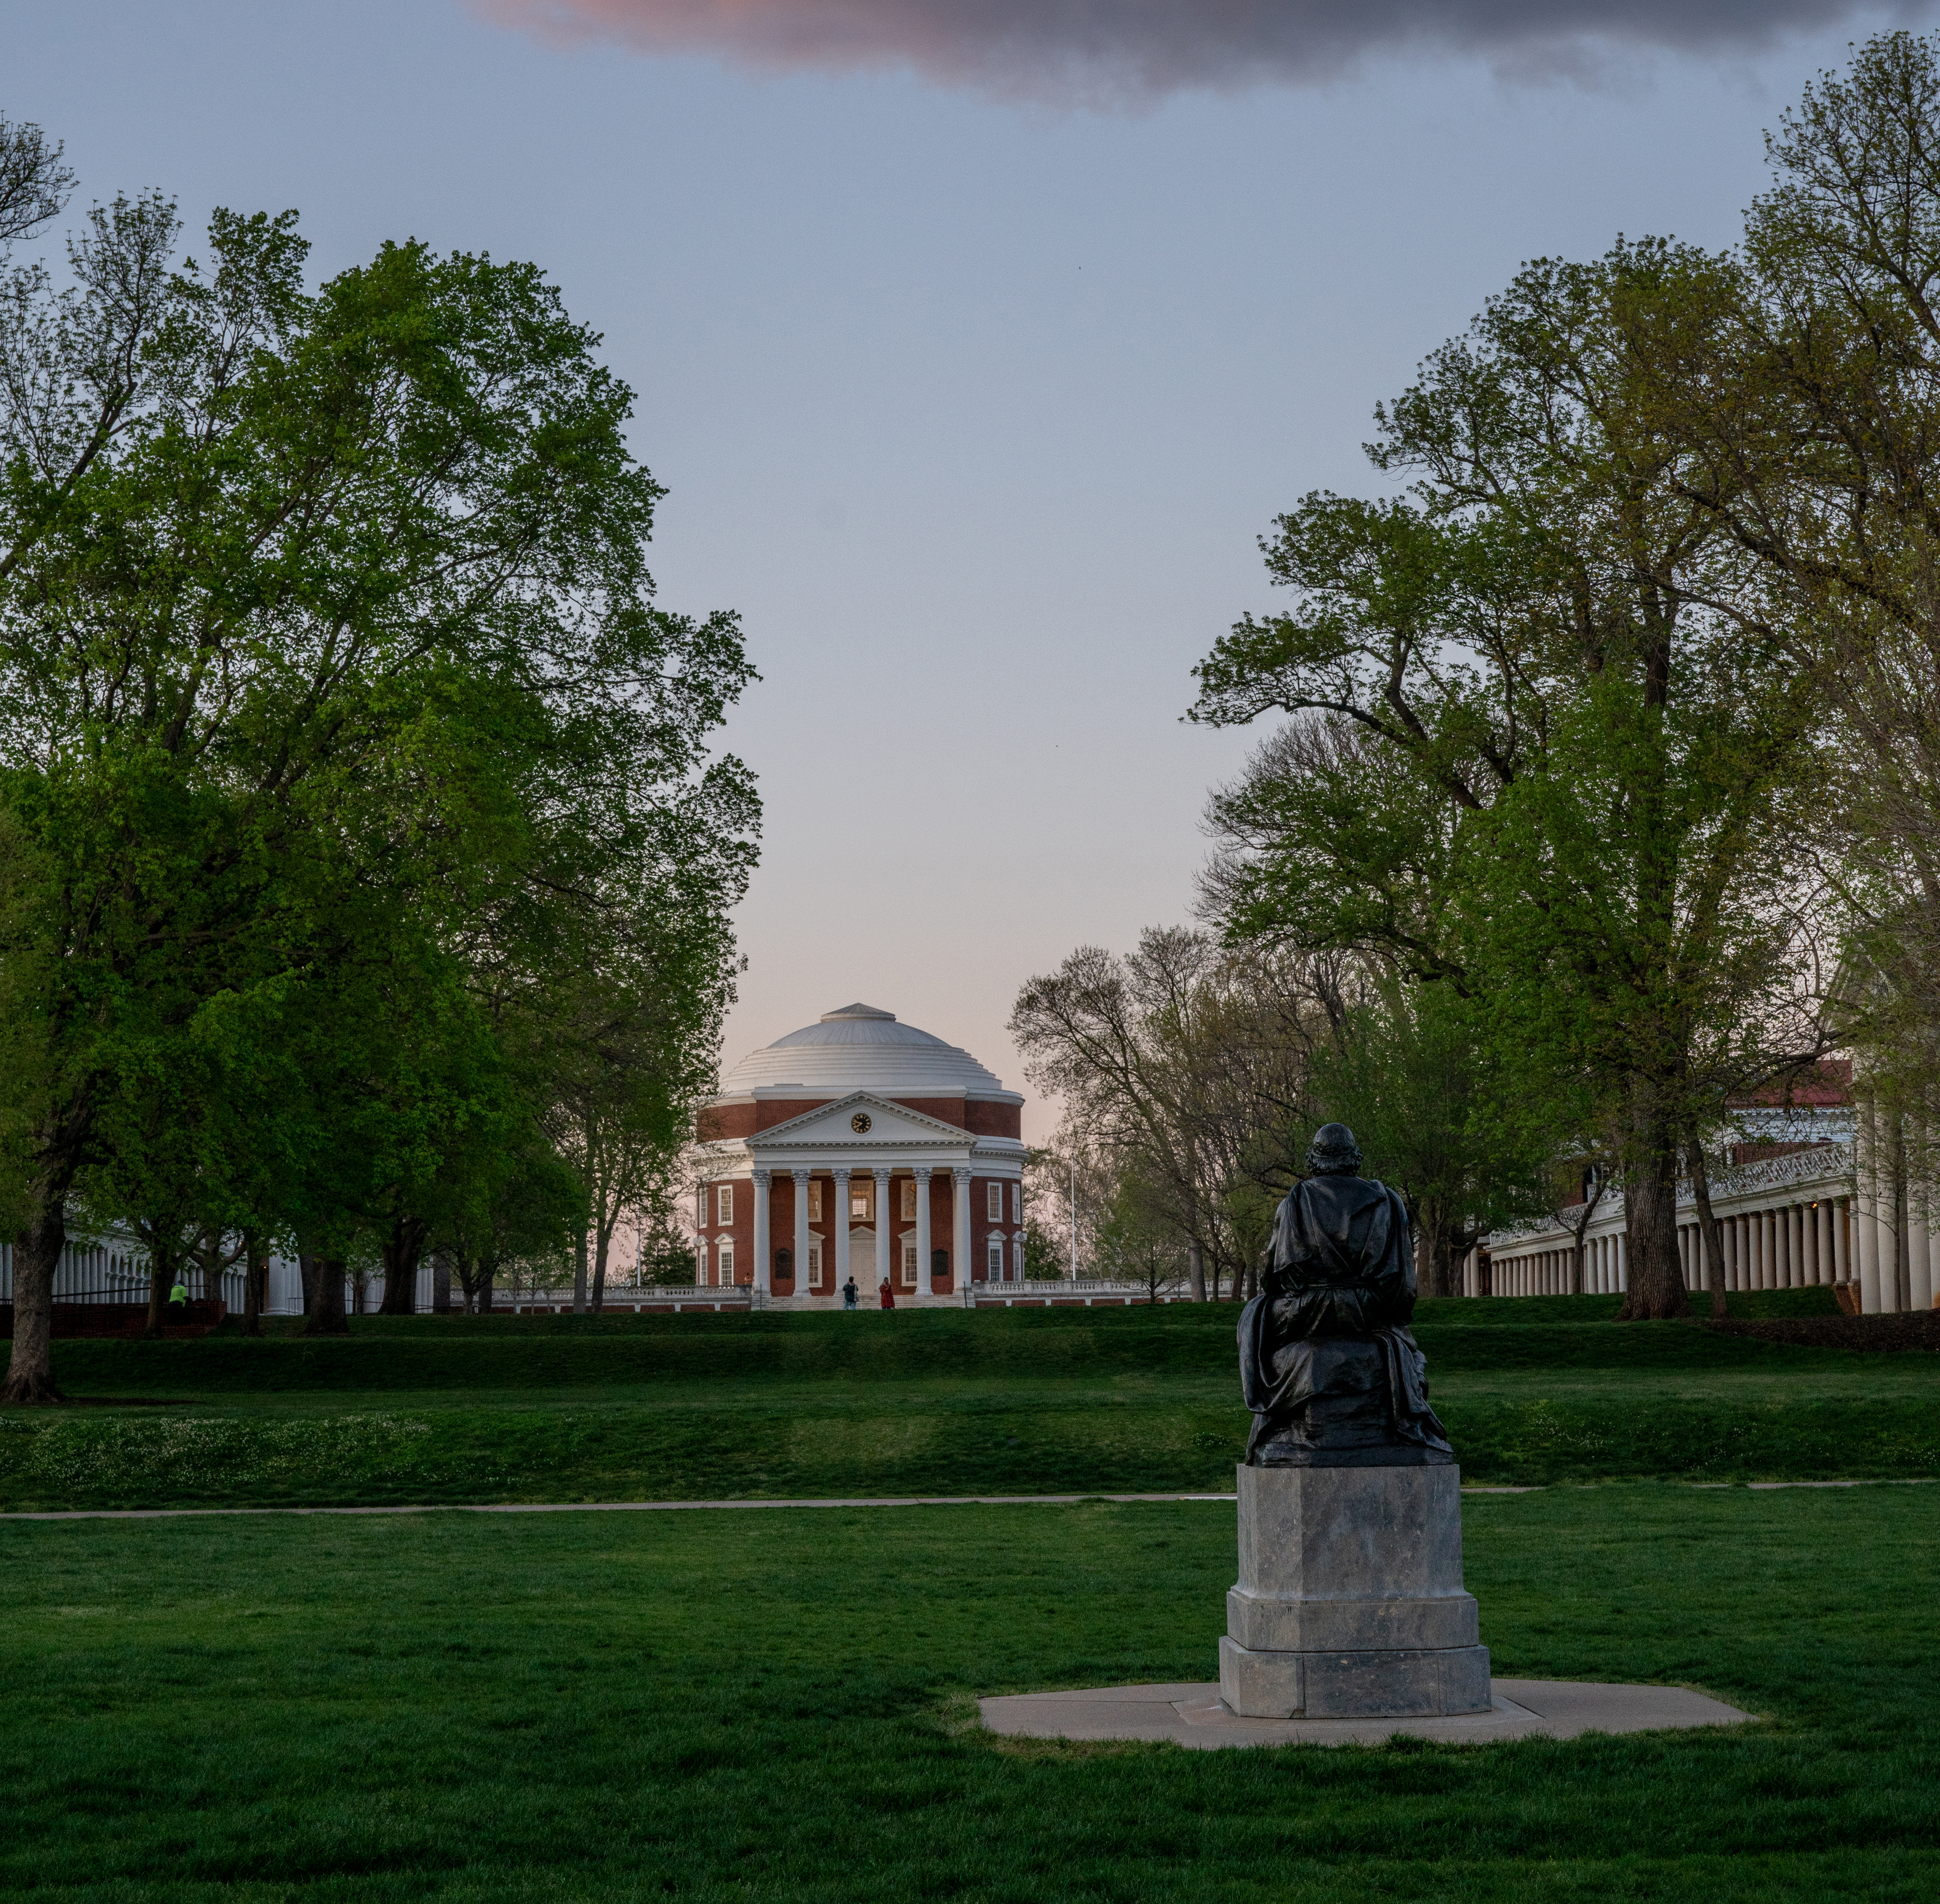 Spring day on the Lawn at UVA